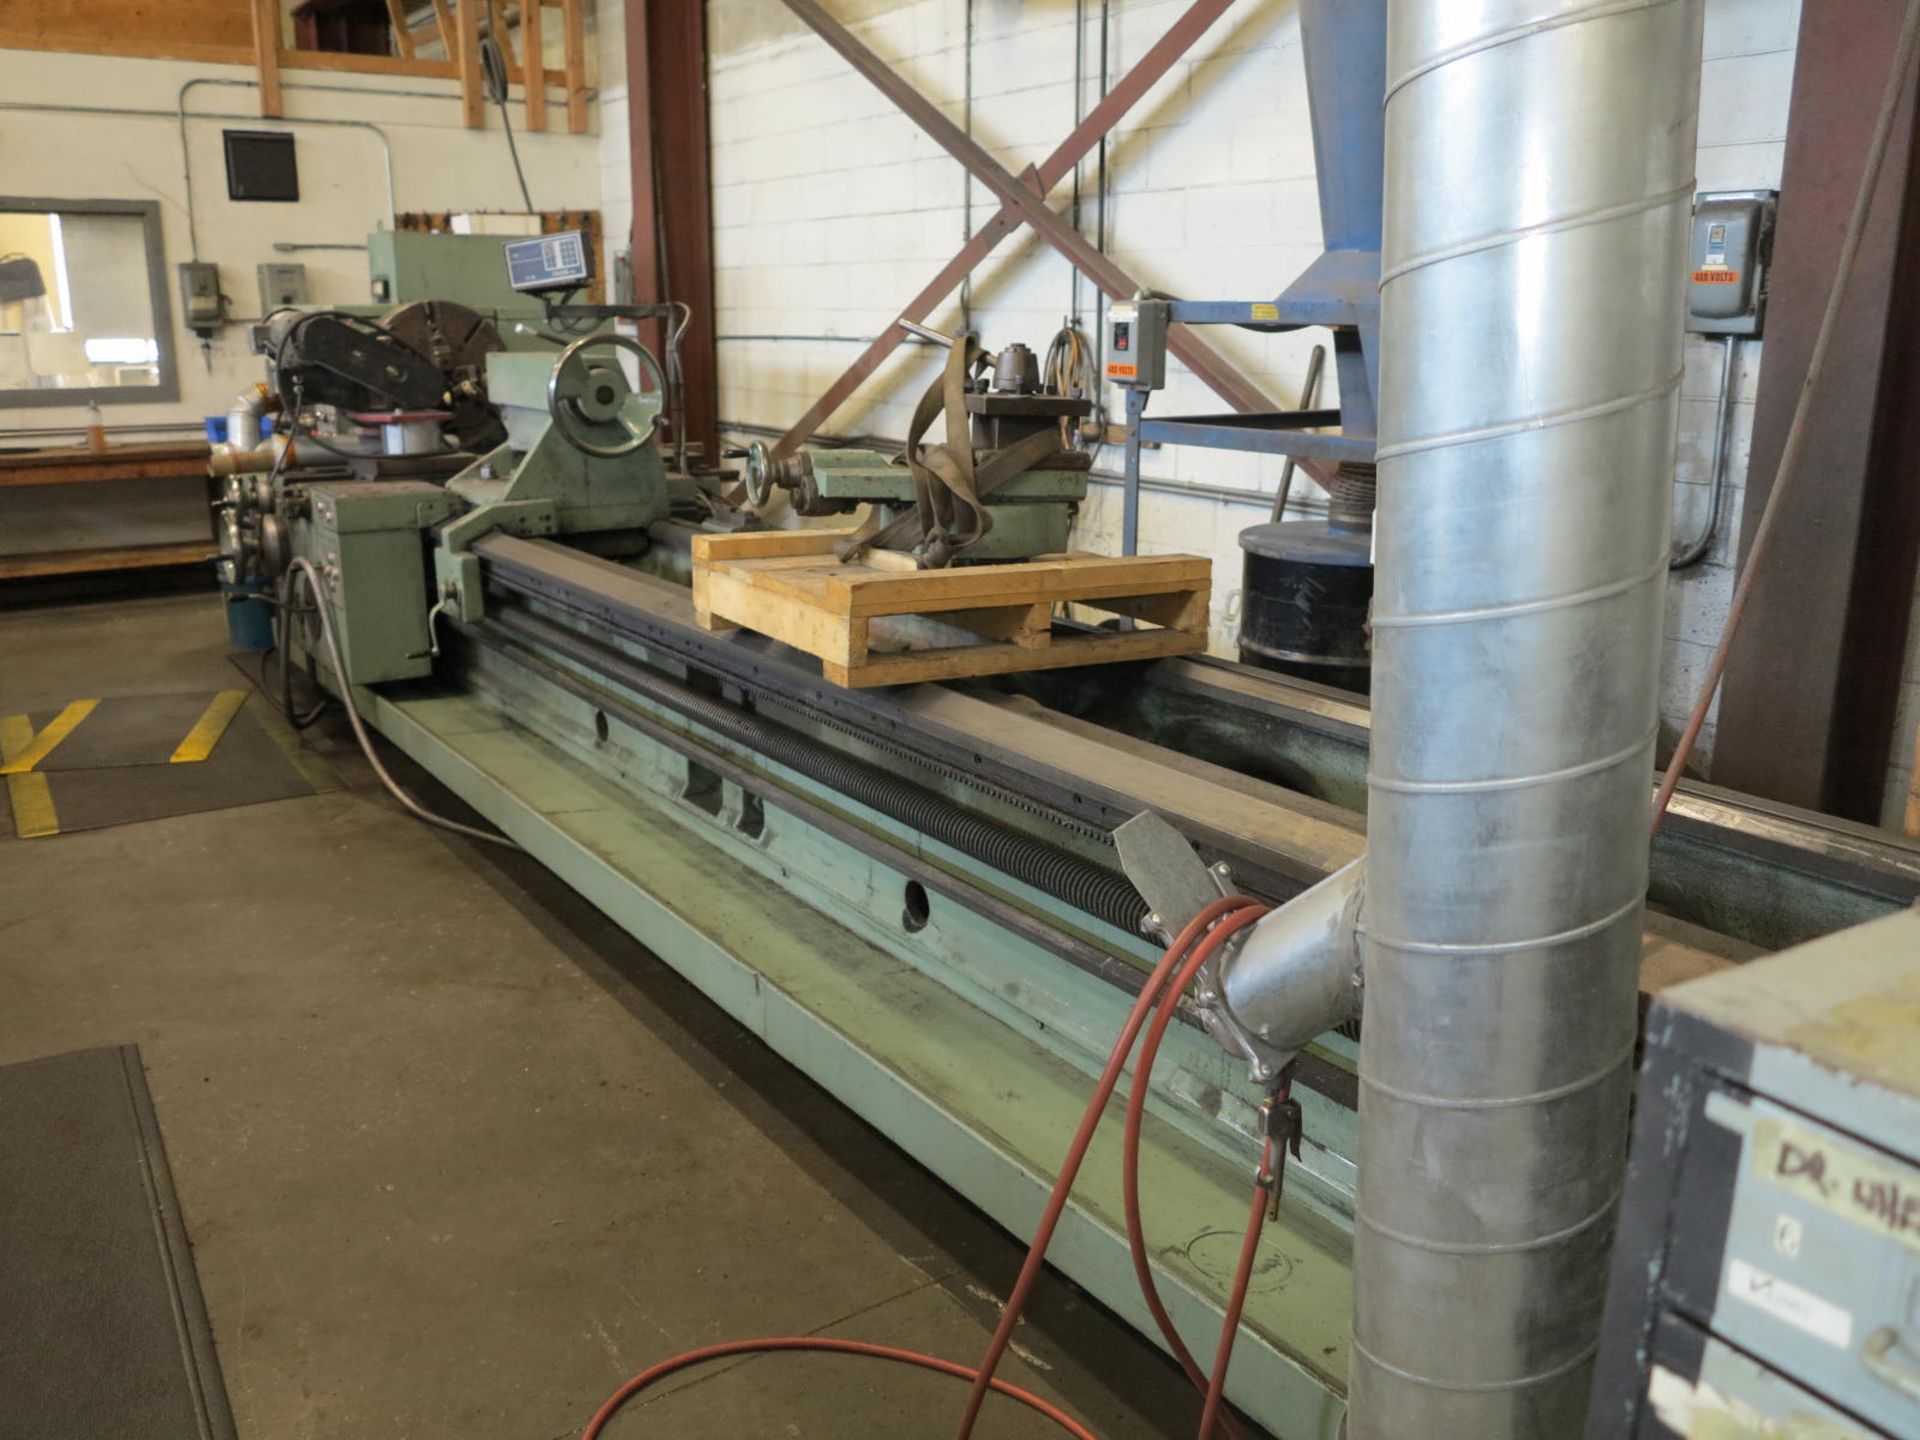 TOS SUS40 18' Bed Lathe, Quick Change Gears, Lead Screw, Wired for 480V, Set Up for Grinding